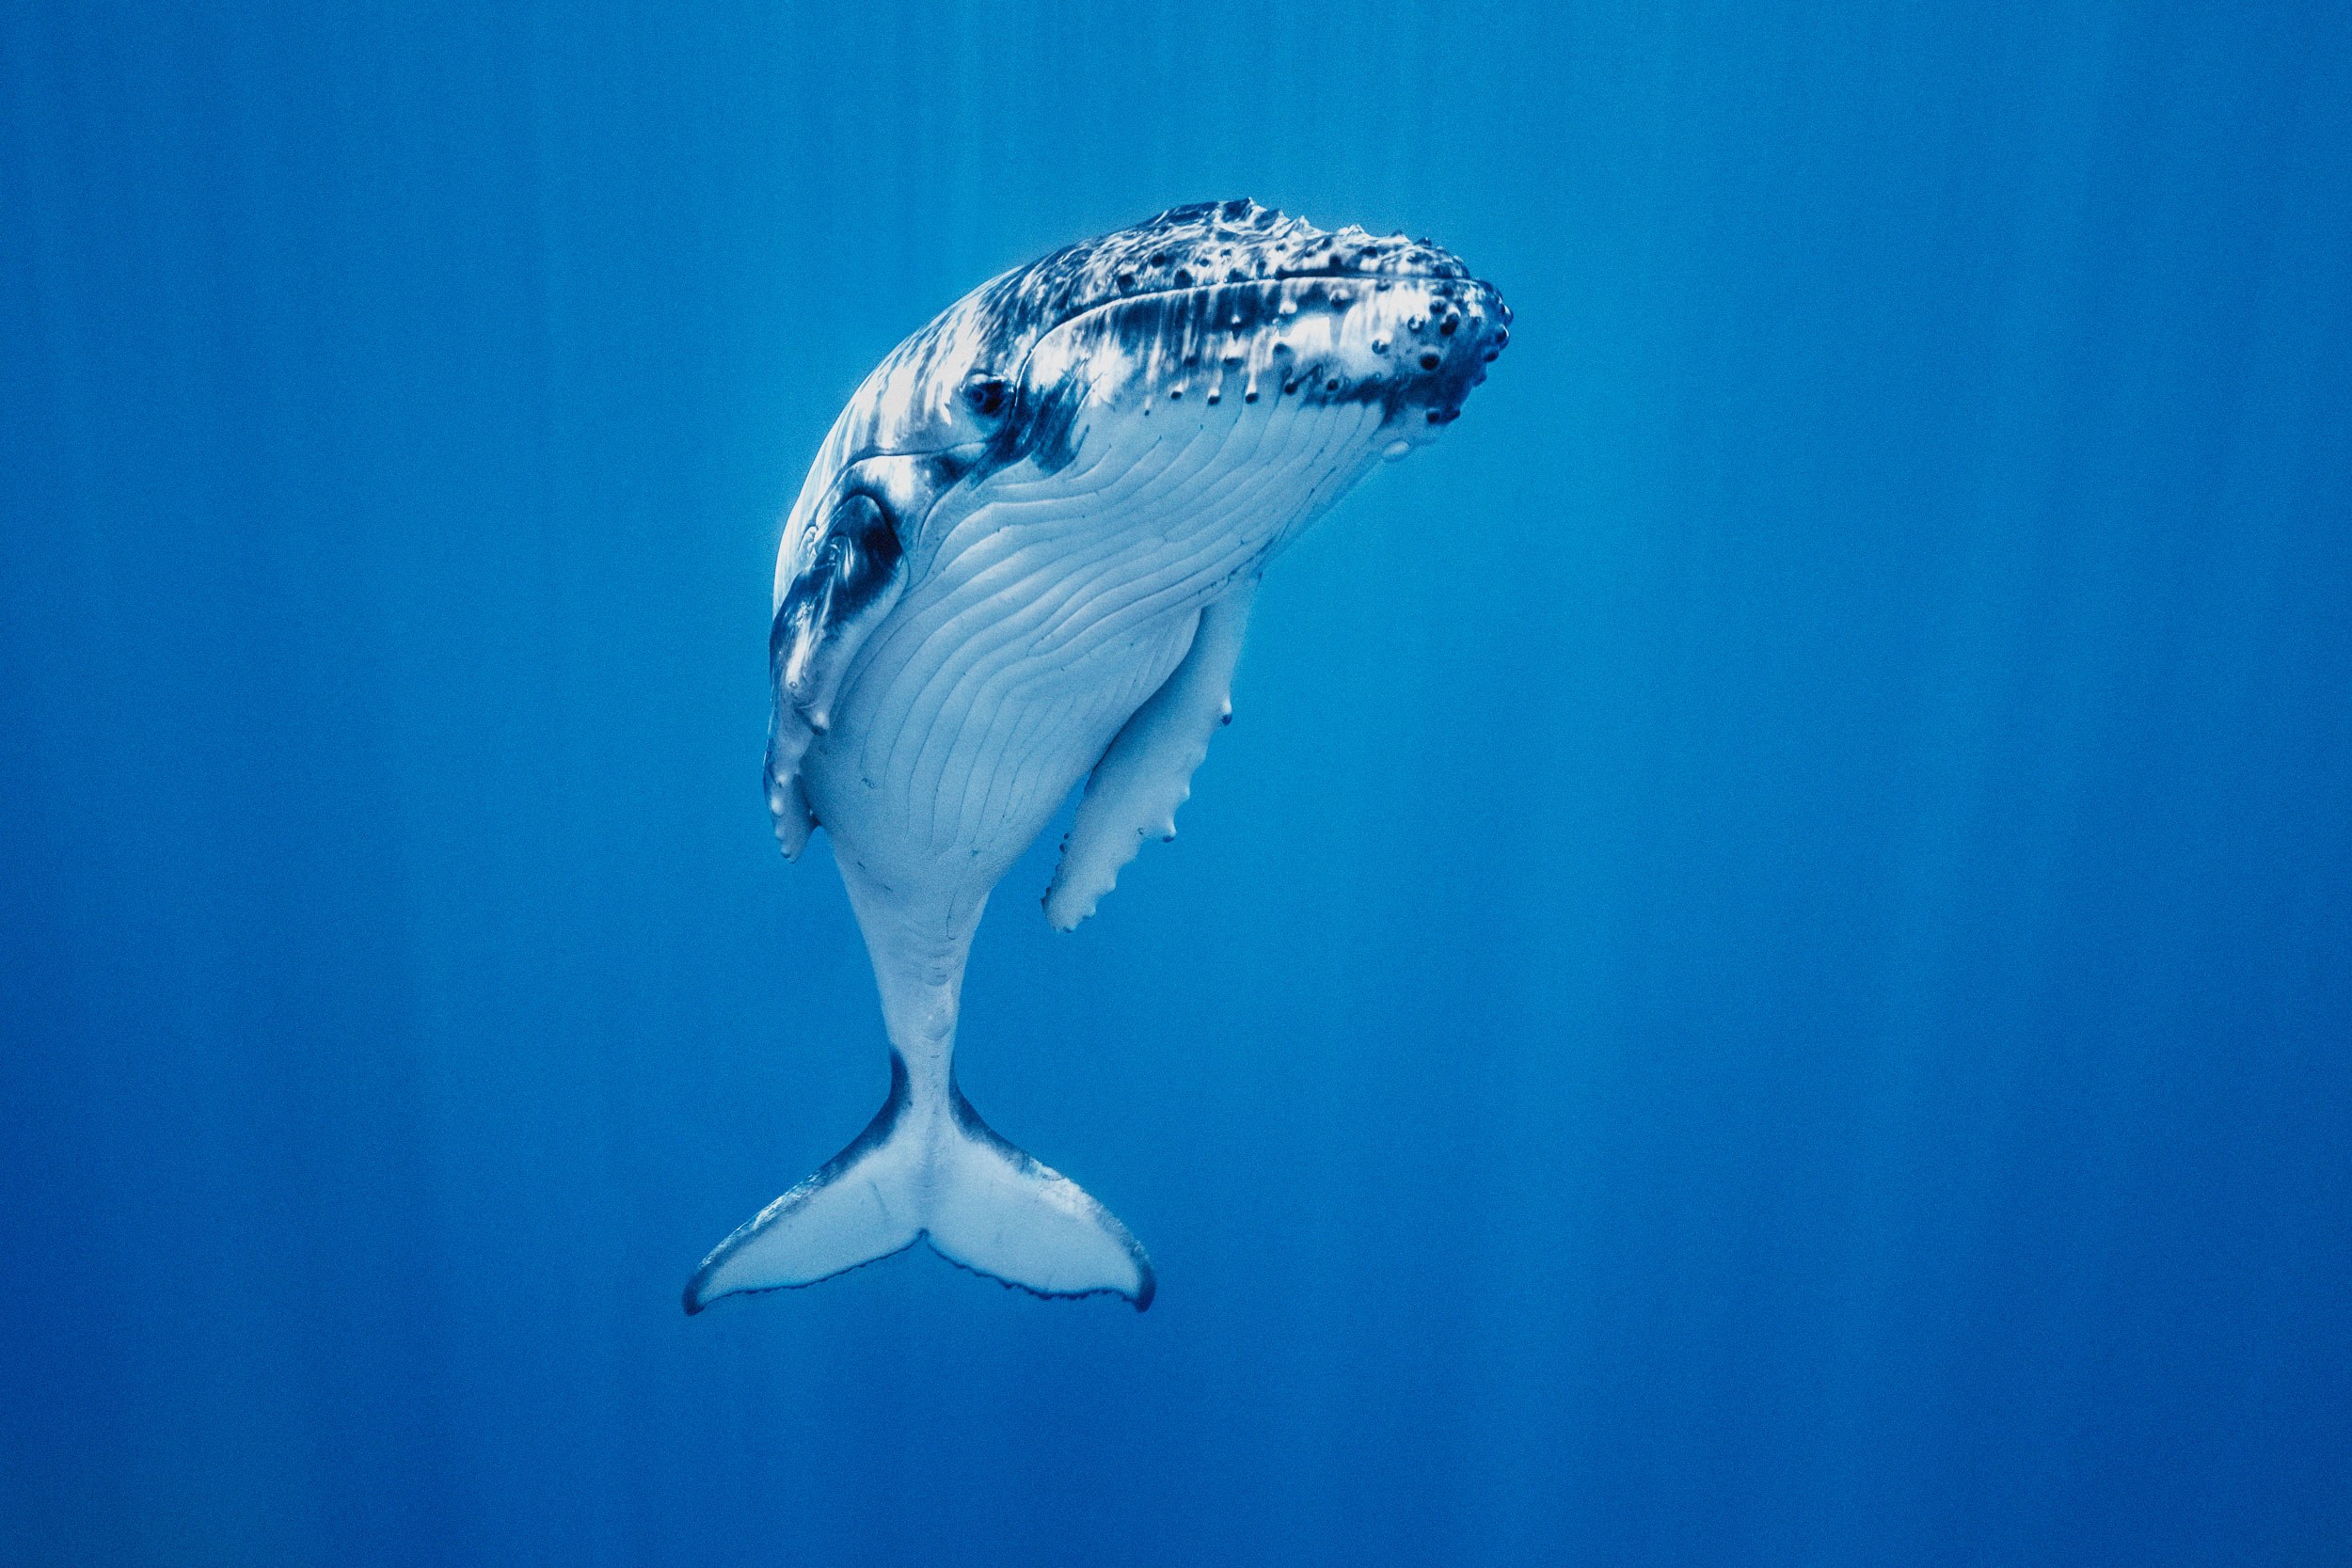 Dive Into the Serene, Magical World of the Humpback Whale | WIRED